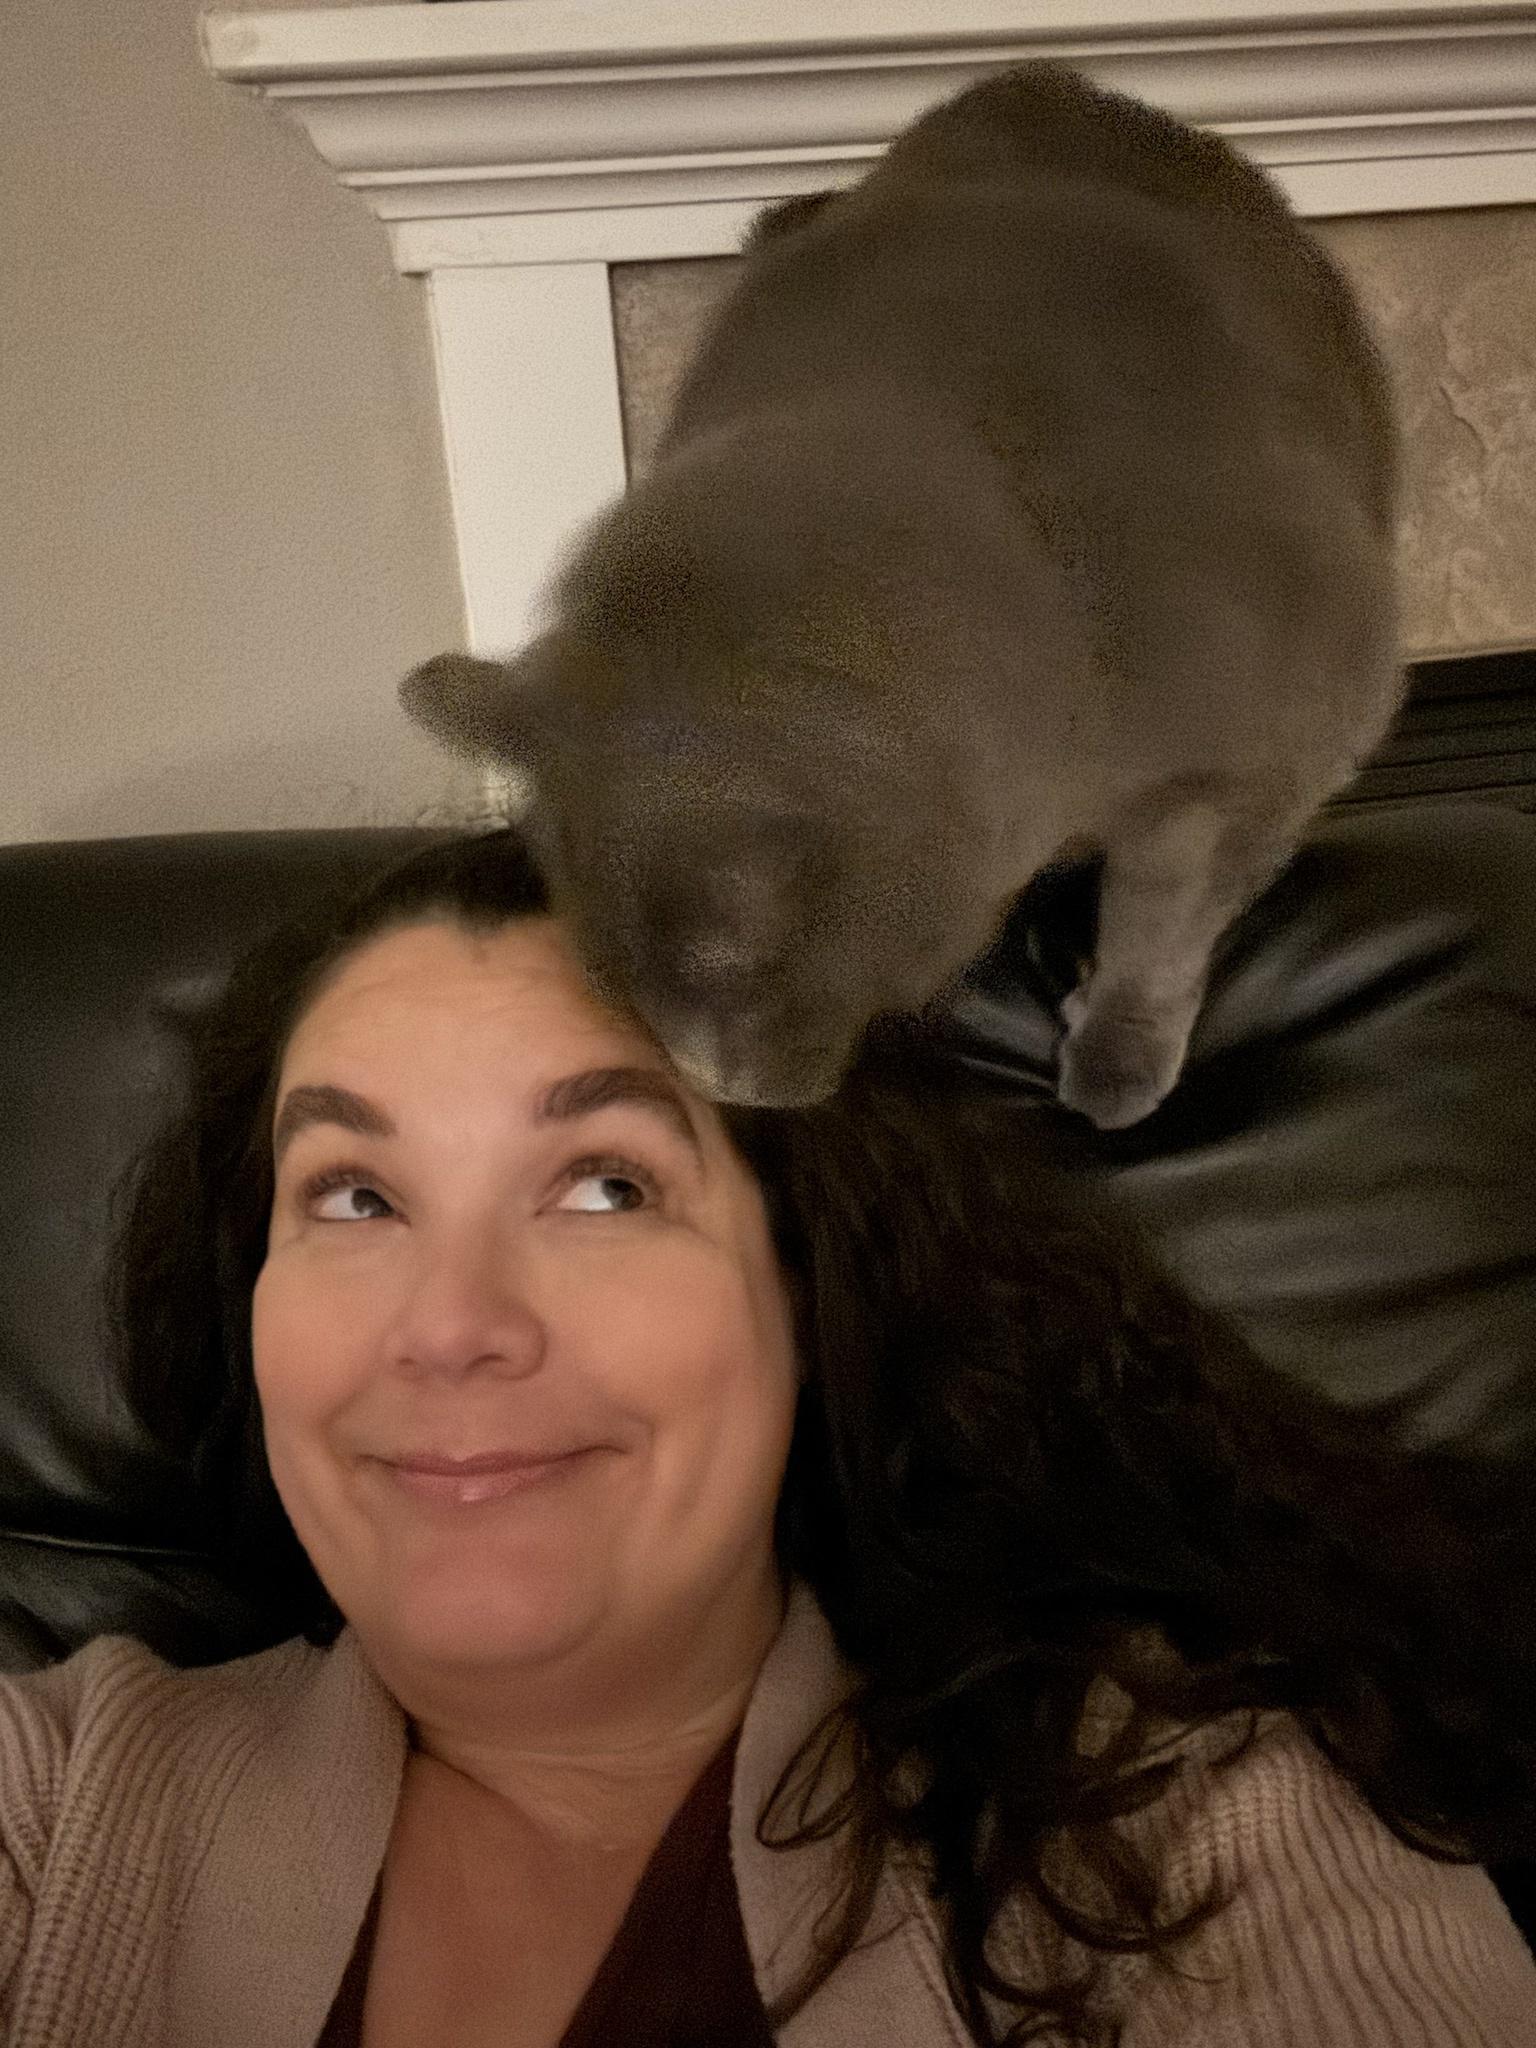 Selfie and cat tax in a single!